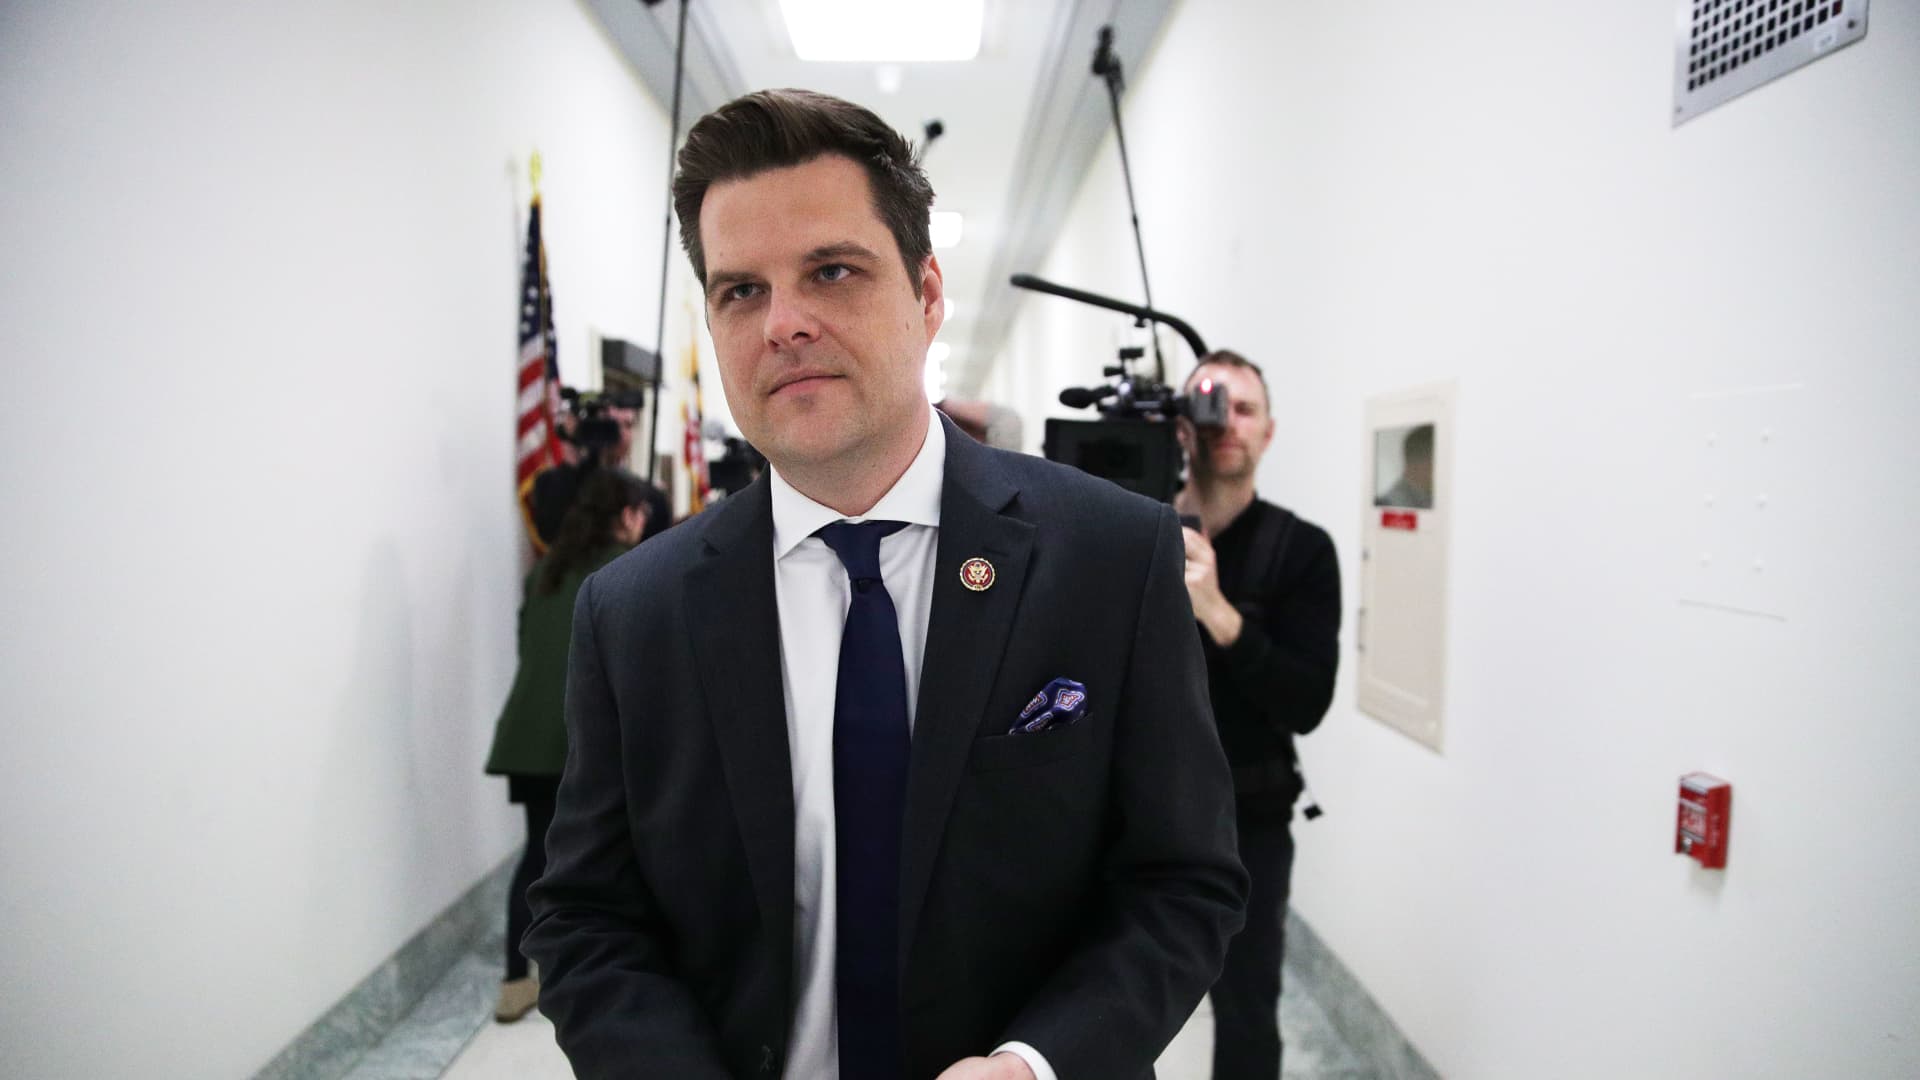 Rep. Matt Gaetz (R-FL) speaks to members of the media outside the hearing of Michael Cohen February 27, 2019 on Capitol Hill in Washington, DC.